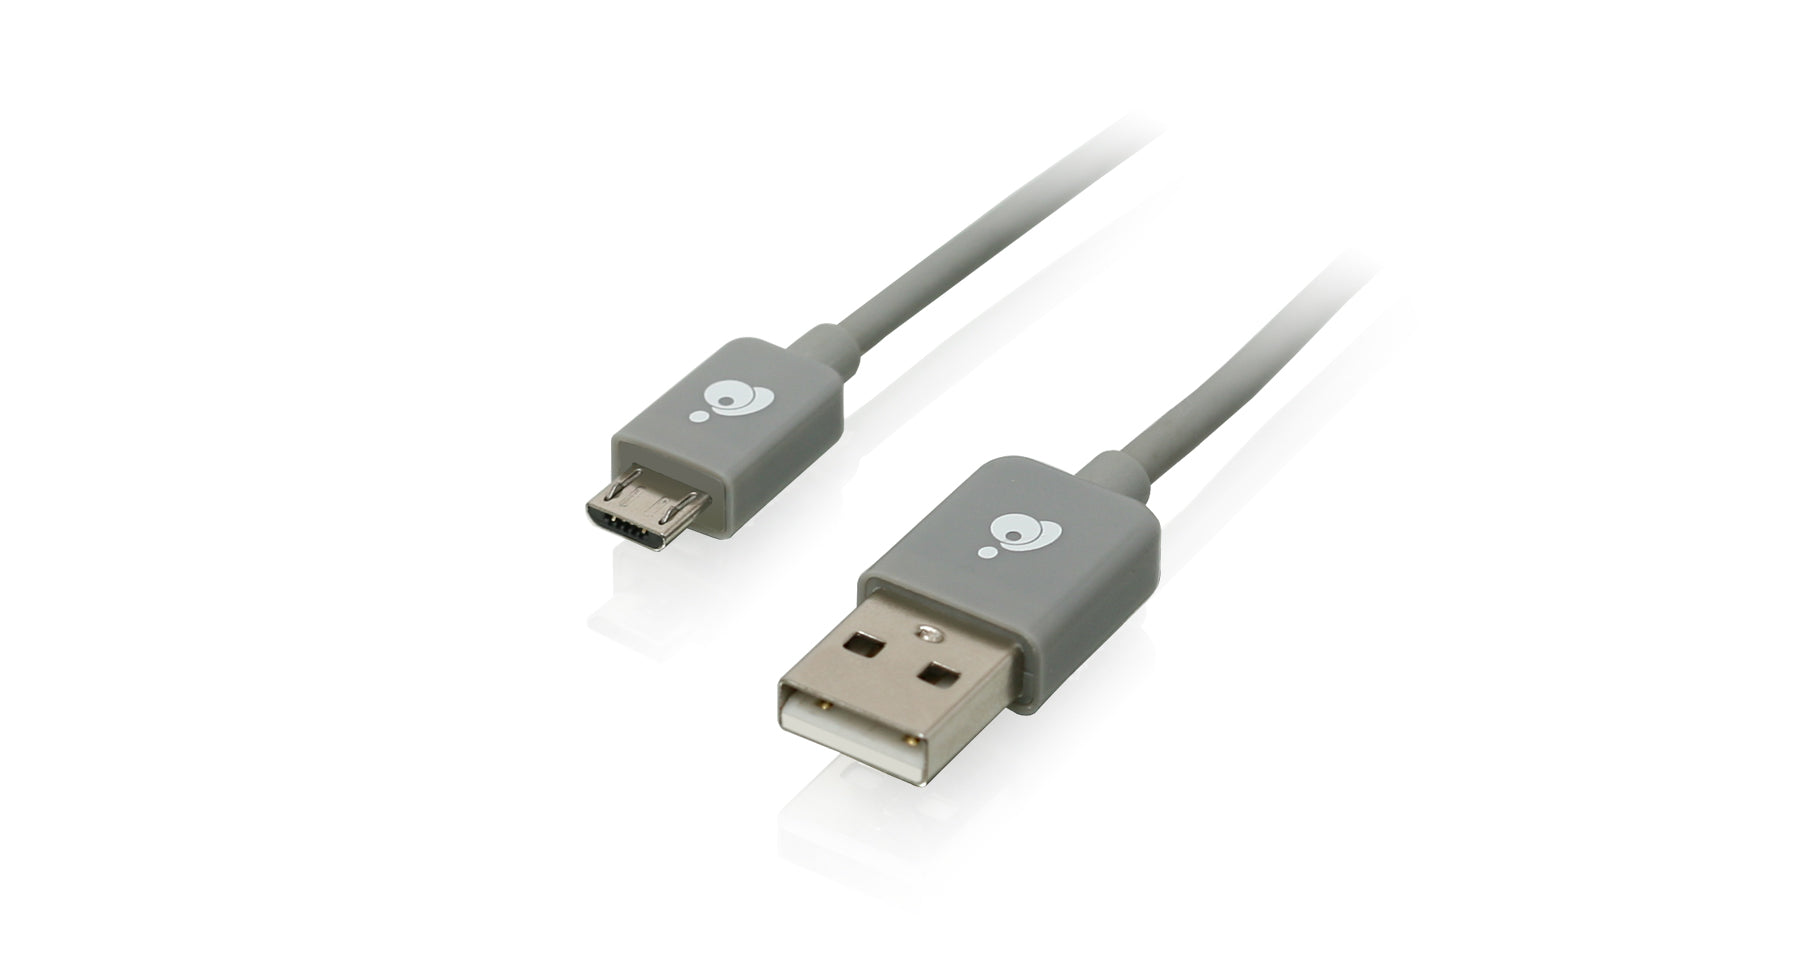 Charge & Sync Cable, 6.5ft (2m) - USB to Micro USB Cable